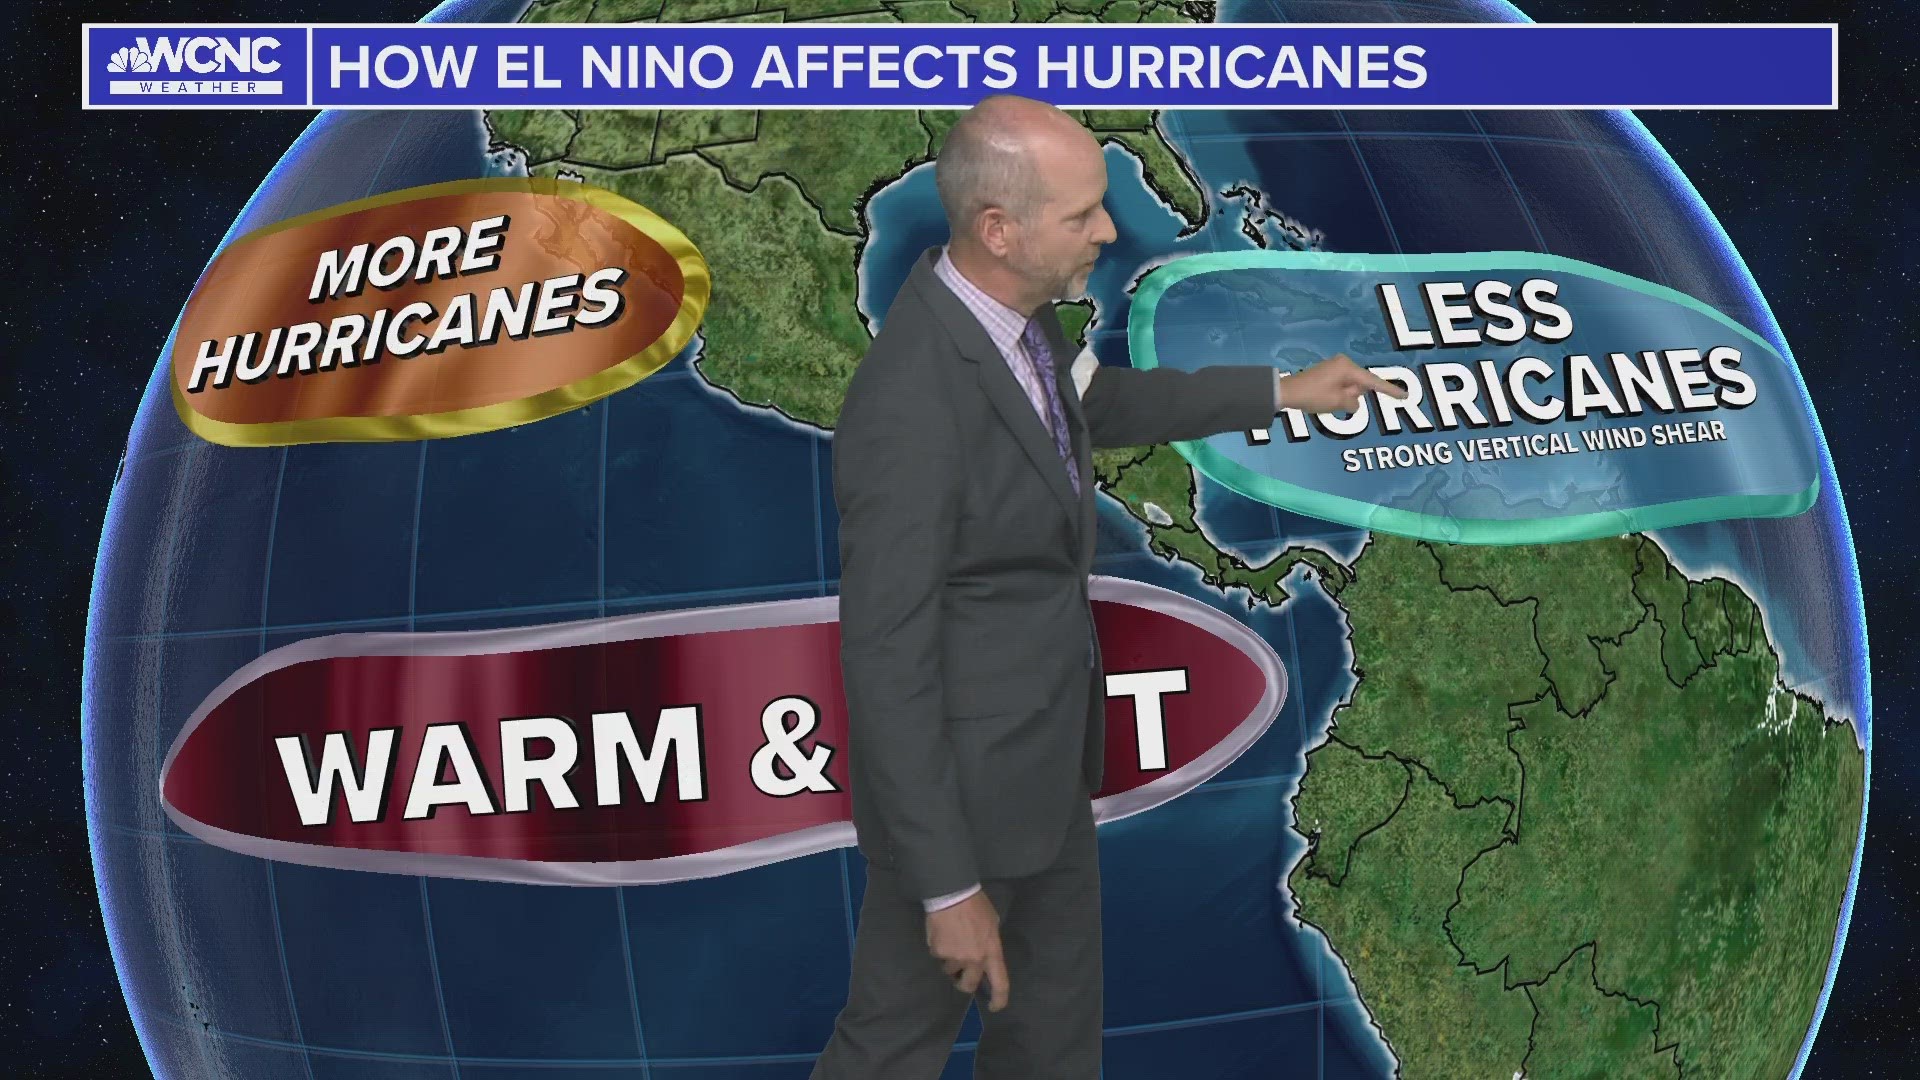 The El Niño Watch persists with El Niño likely to develop within the next couple of months.